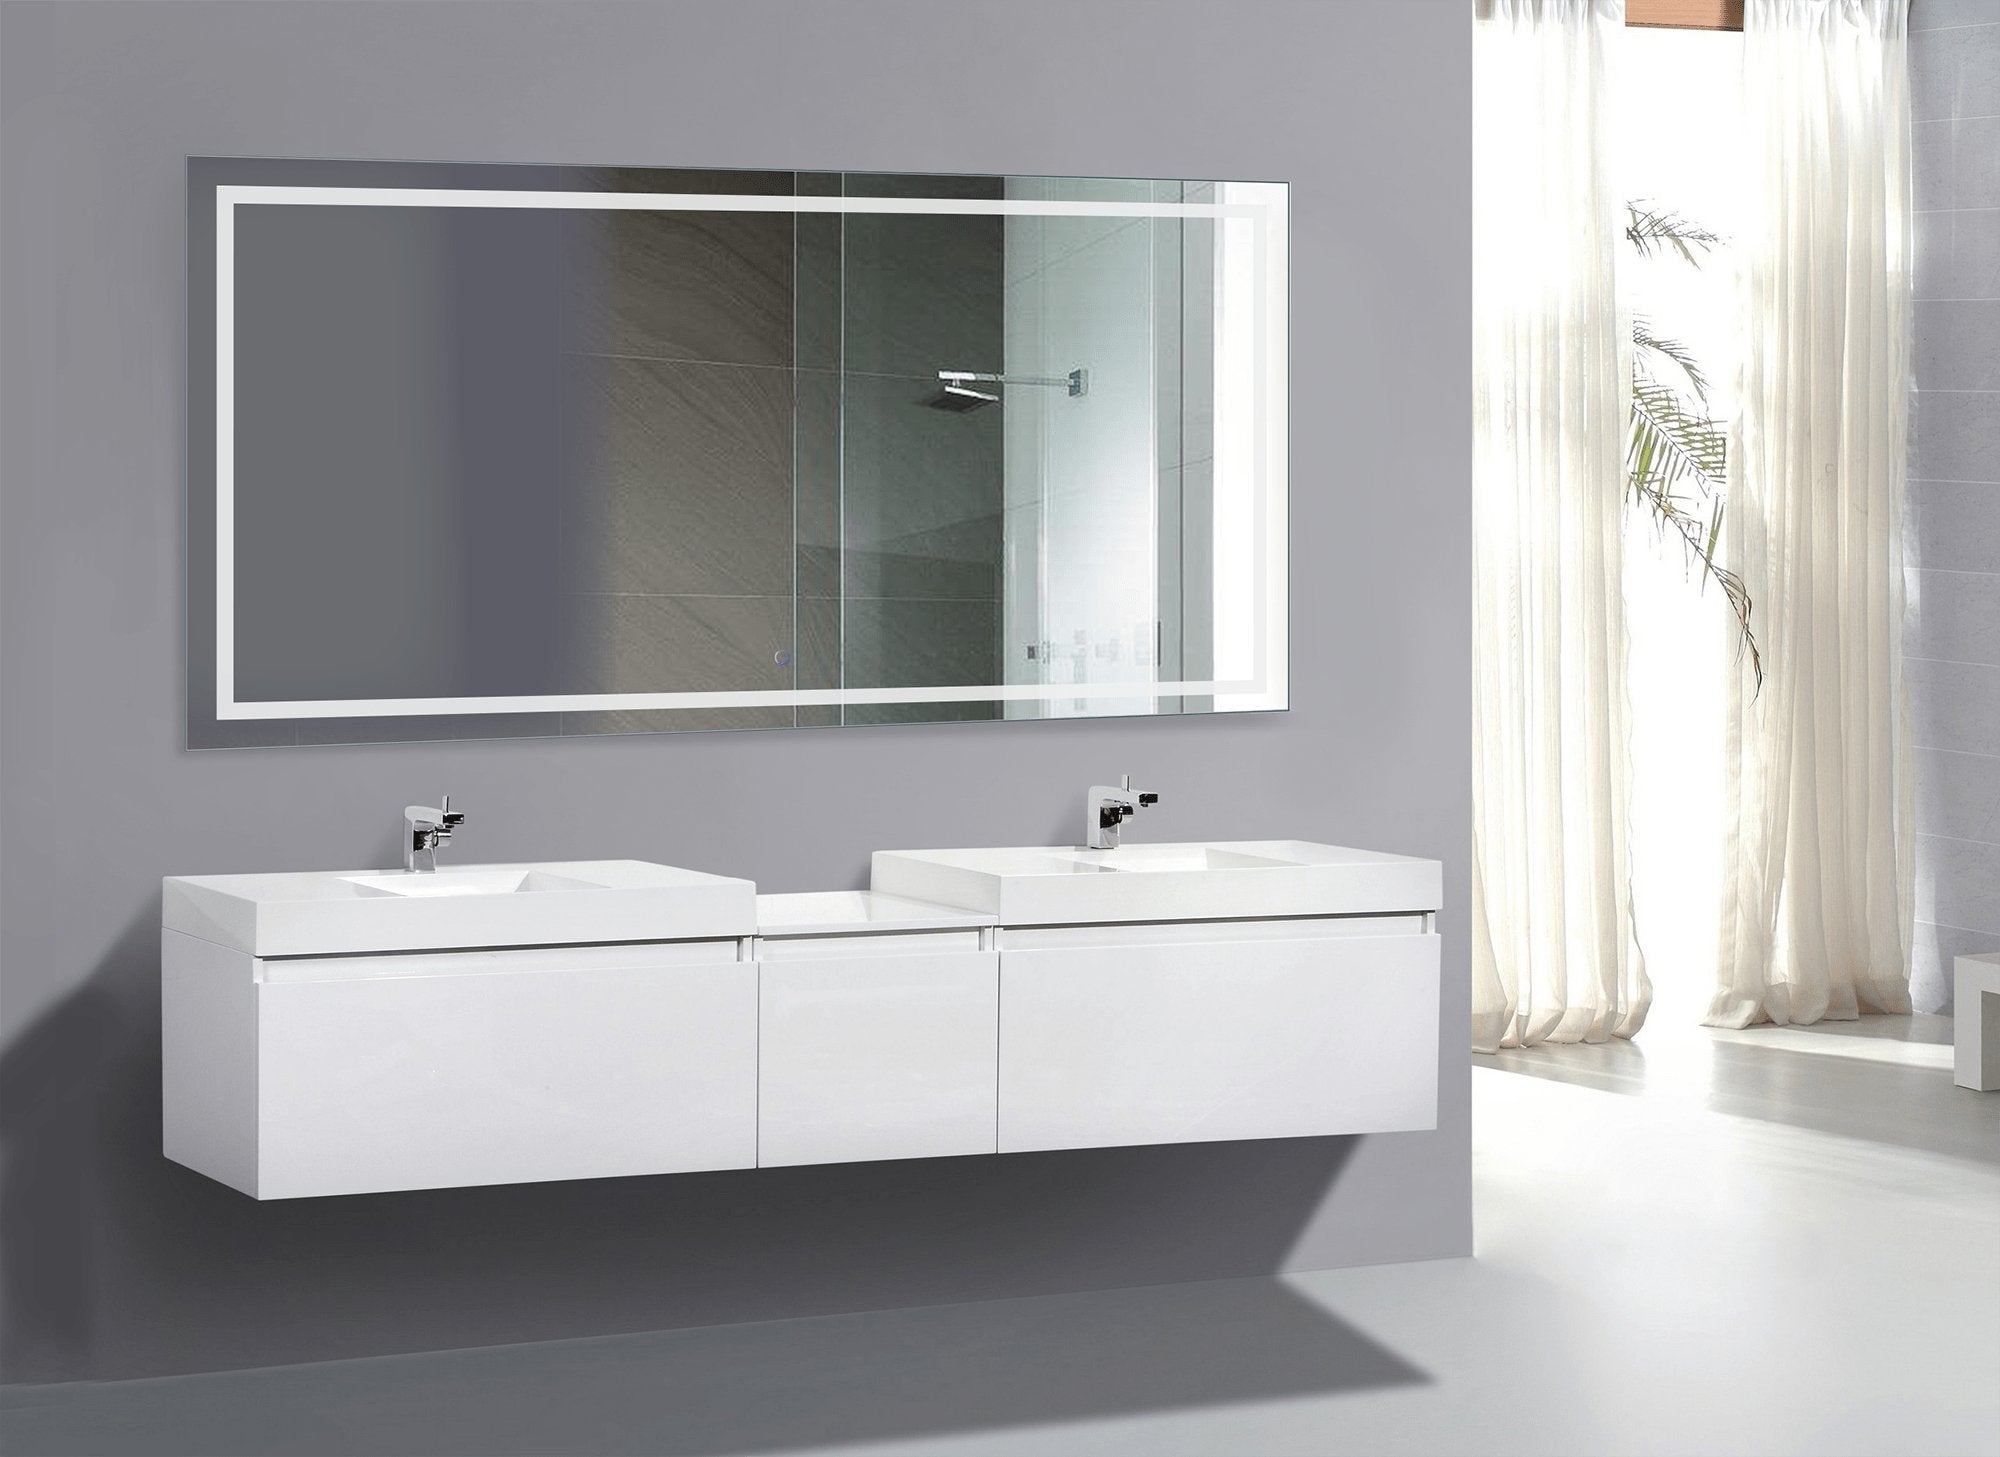 Icon 72" X 36" LED Bathroom Mirror w/ Dimmer & Defogger | Large Lighted Vanity Mirror - Molaix - Molaix850033437027Lighted Wall Mirror,RectangleICON7236